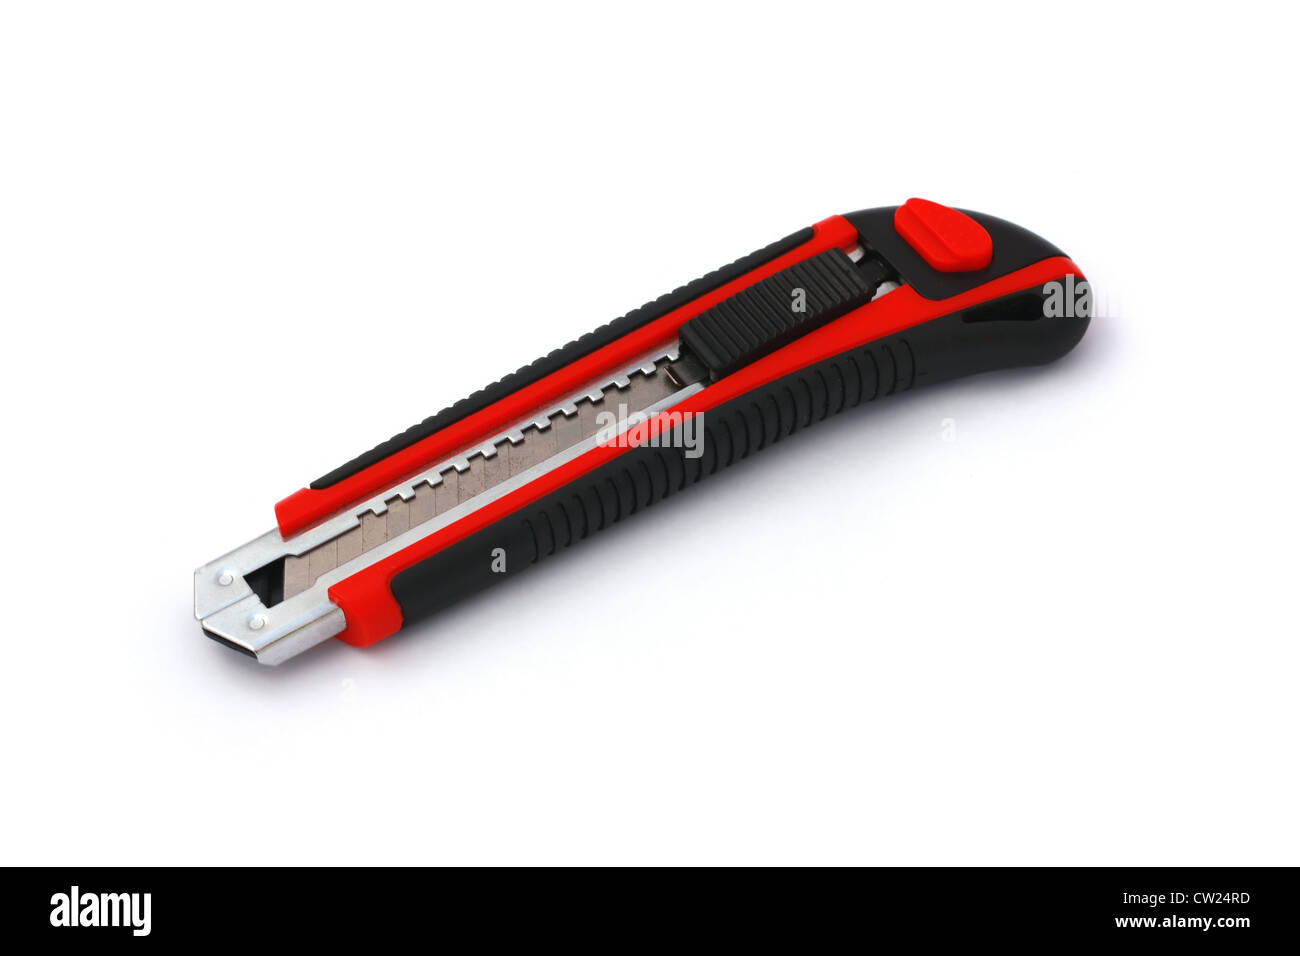 Red-black box knife isolated on white Stock Photo